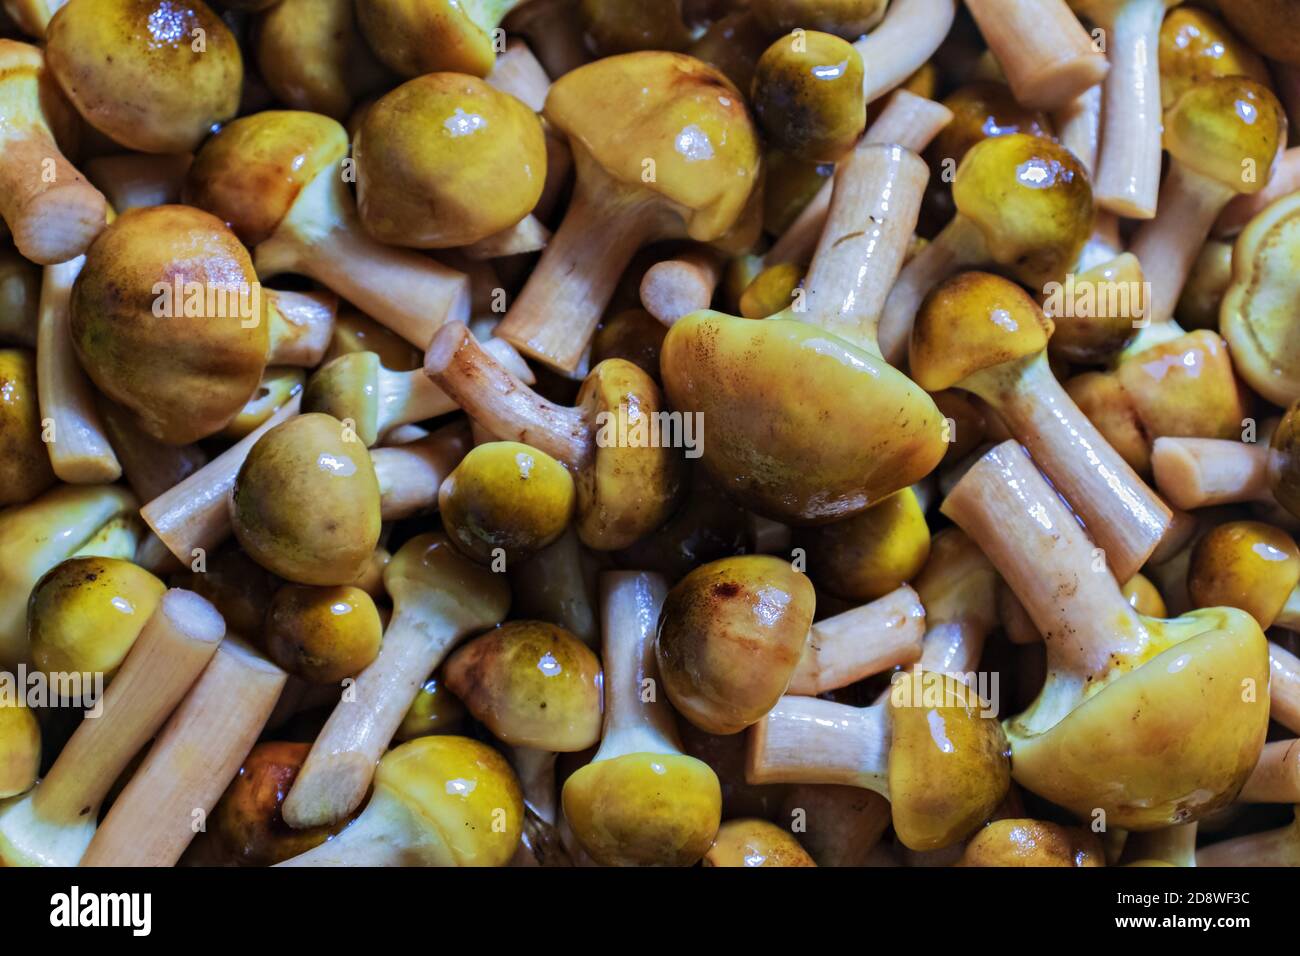 View of a group of honey fungus mushrooms Stock Photo